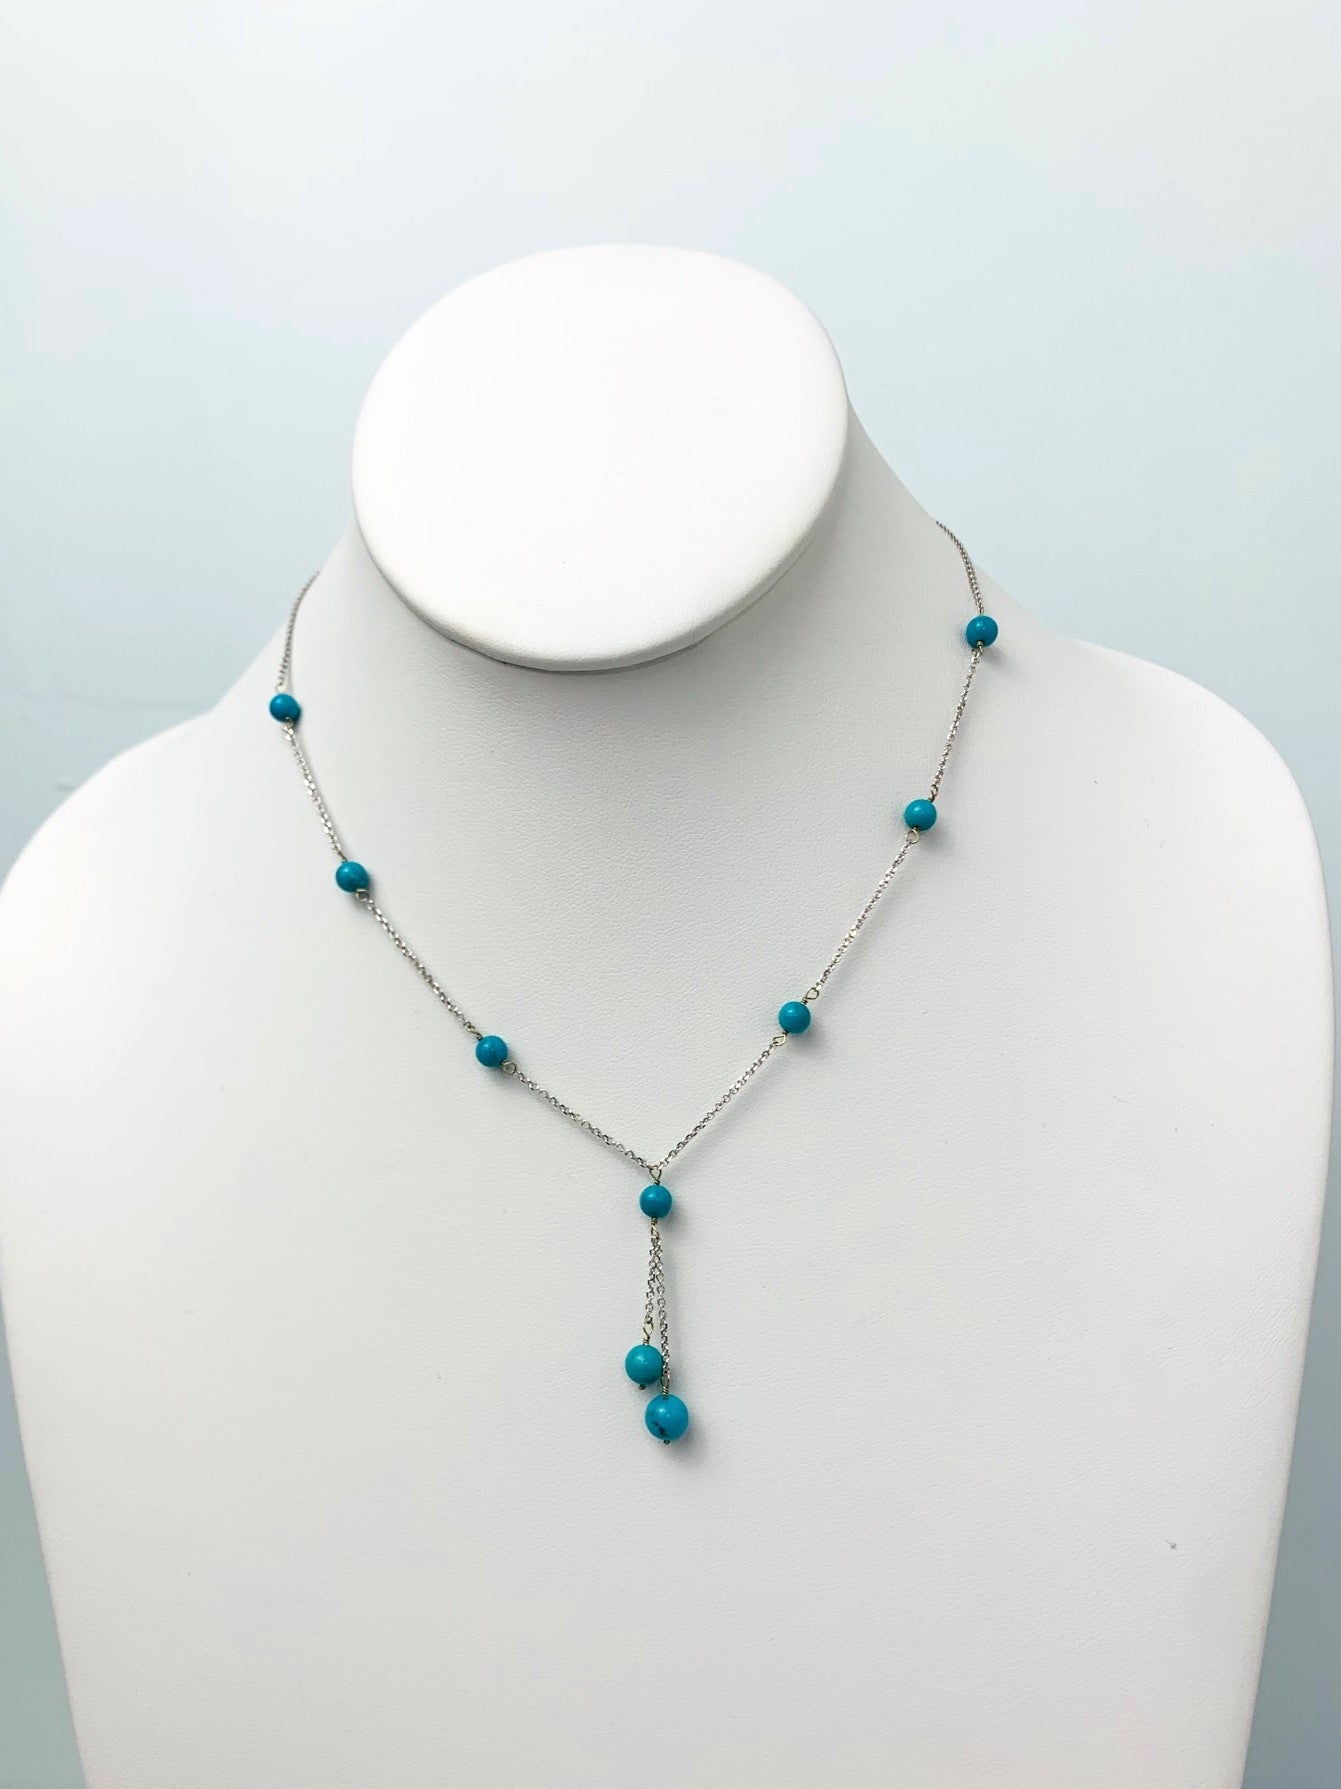 16" Turquoise Station Necklace in 14KW - NCK-427-LARGM14W-TQ-16-SM